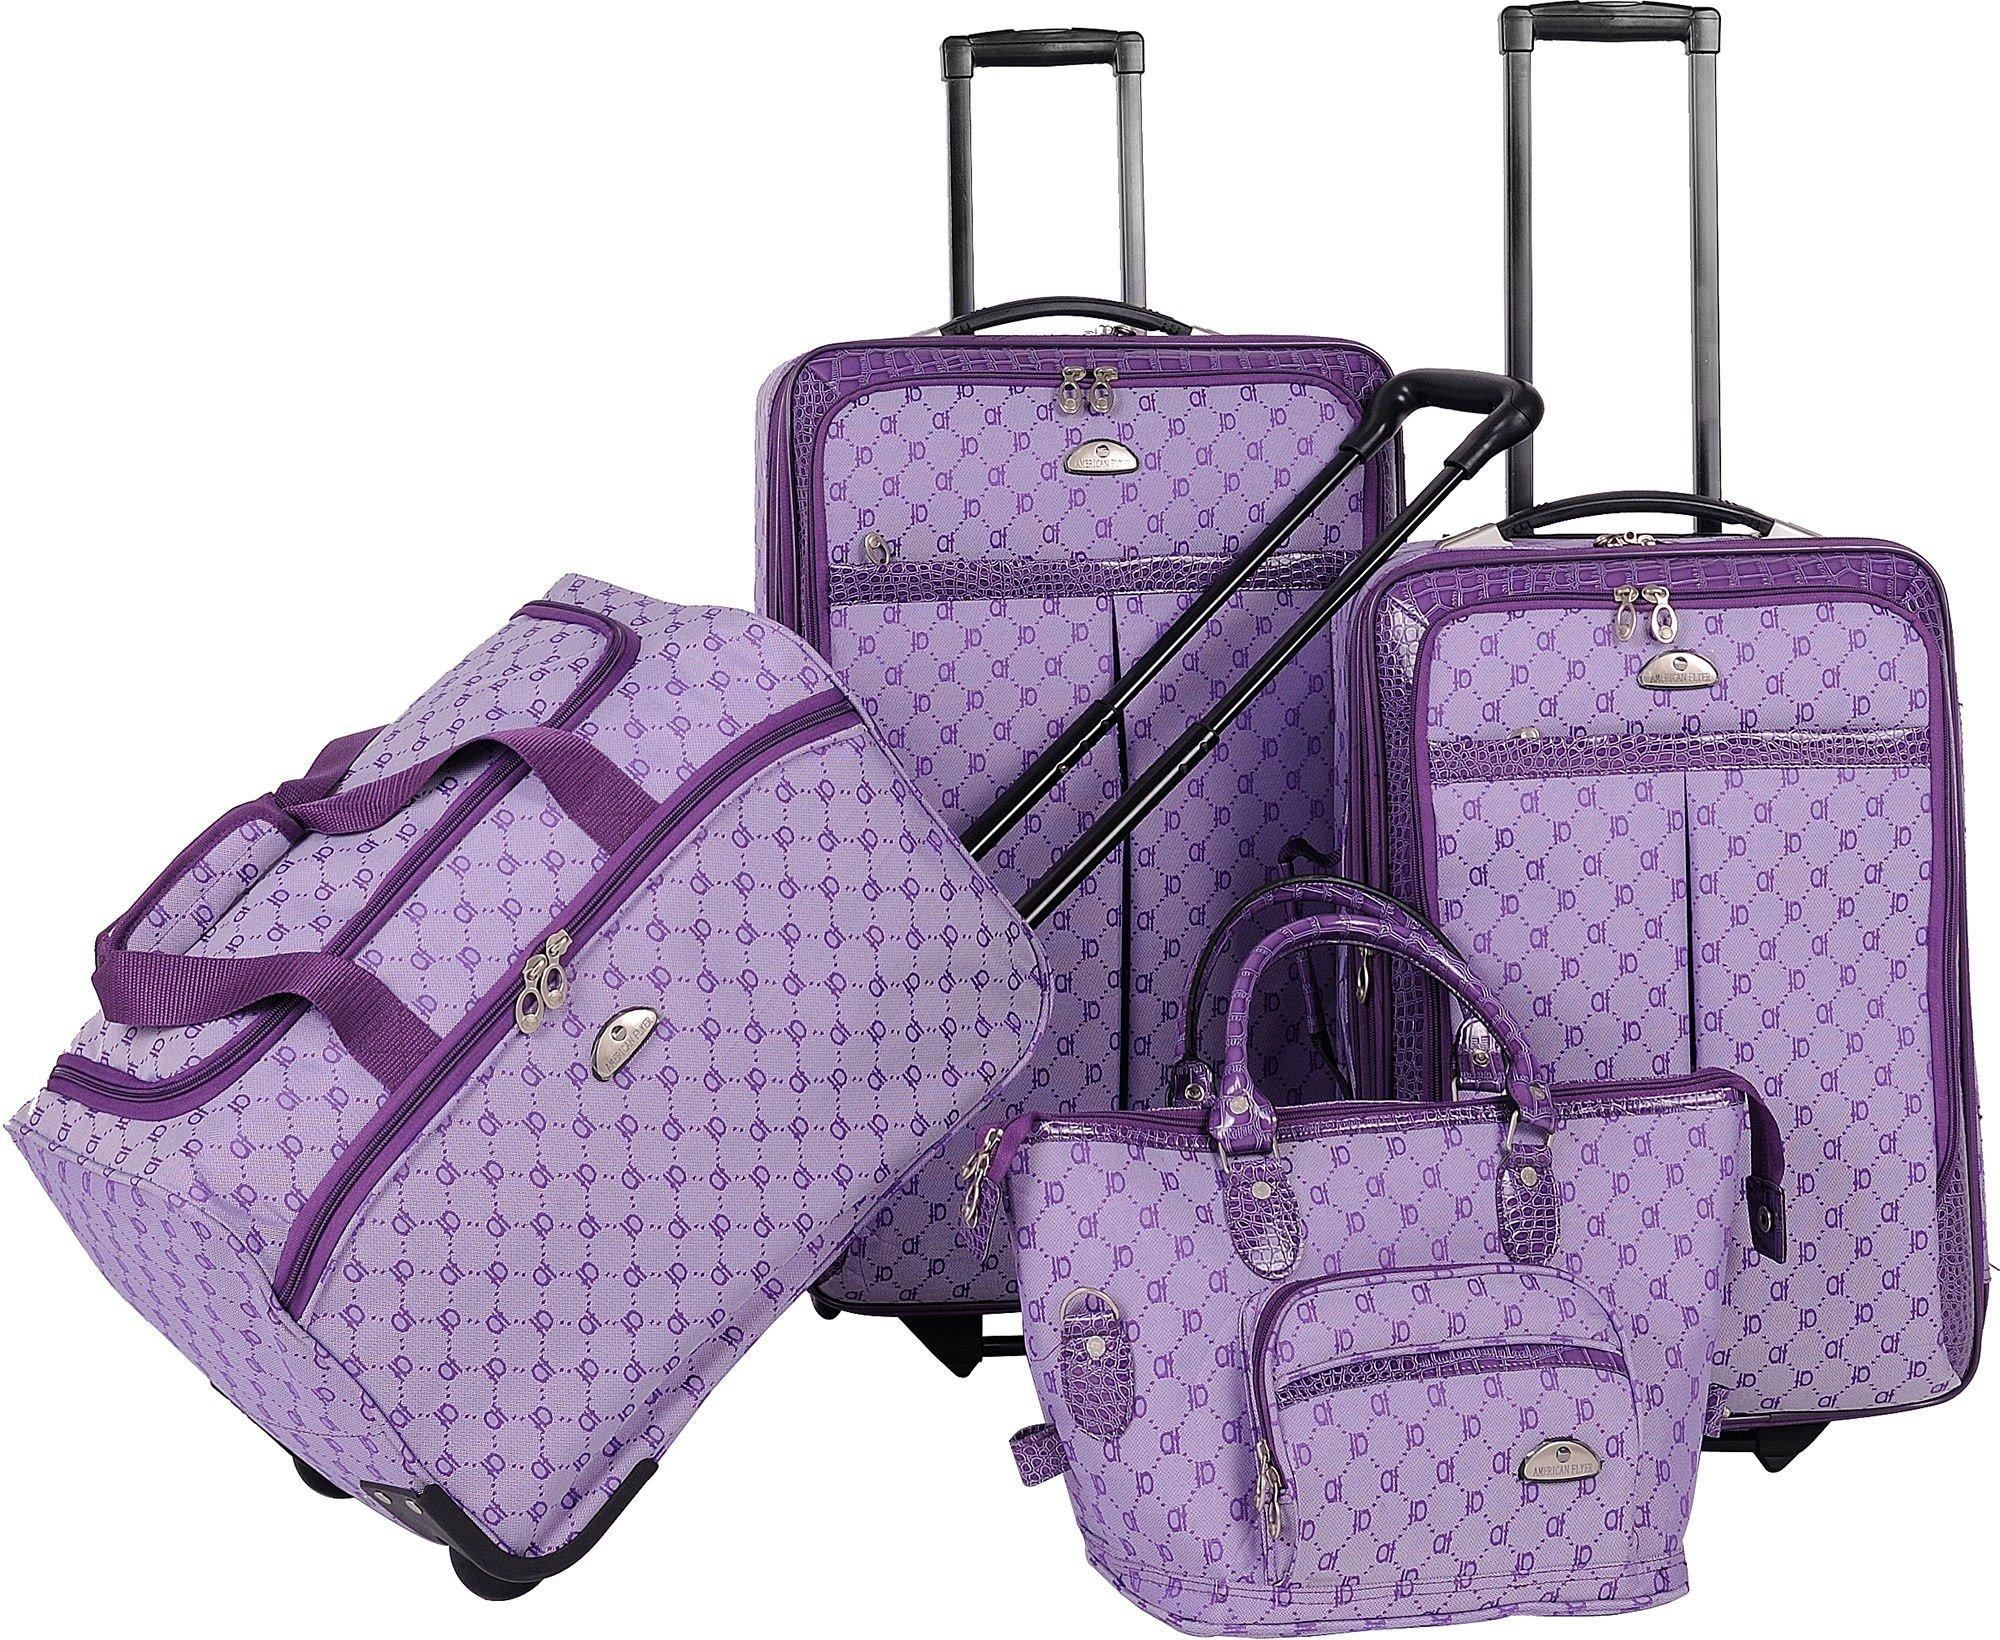 Photos - Suitcase / Backpack Cover American Flyer 4-pc. Signature Luggage Set 